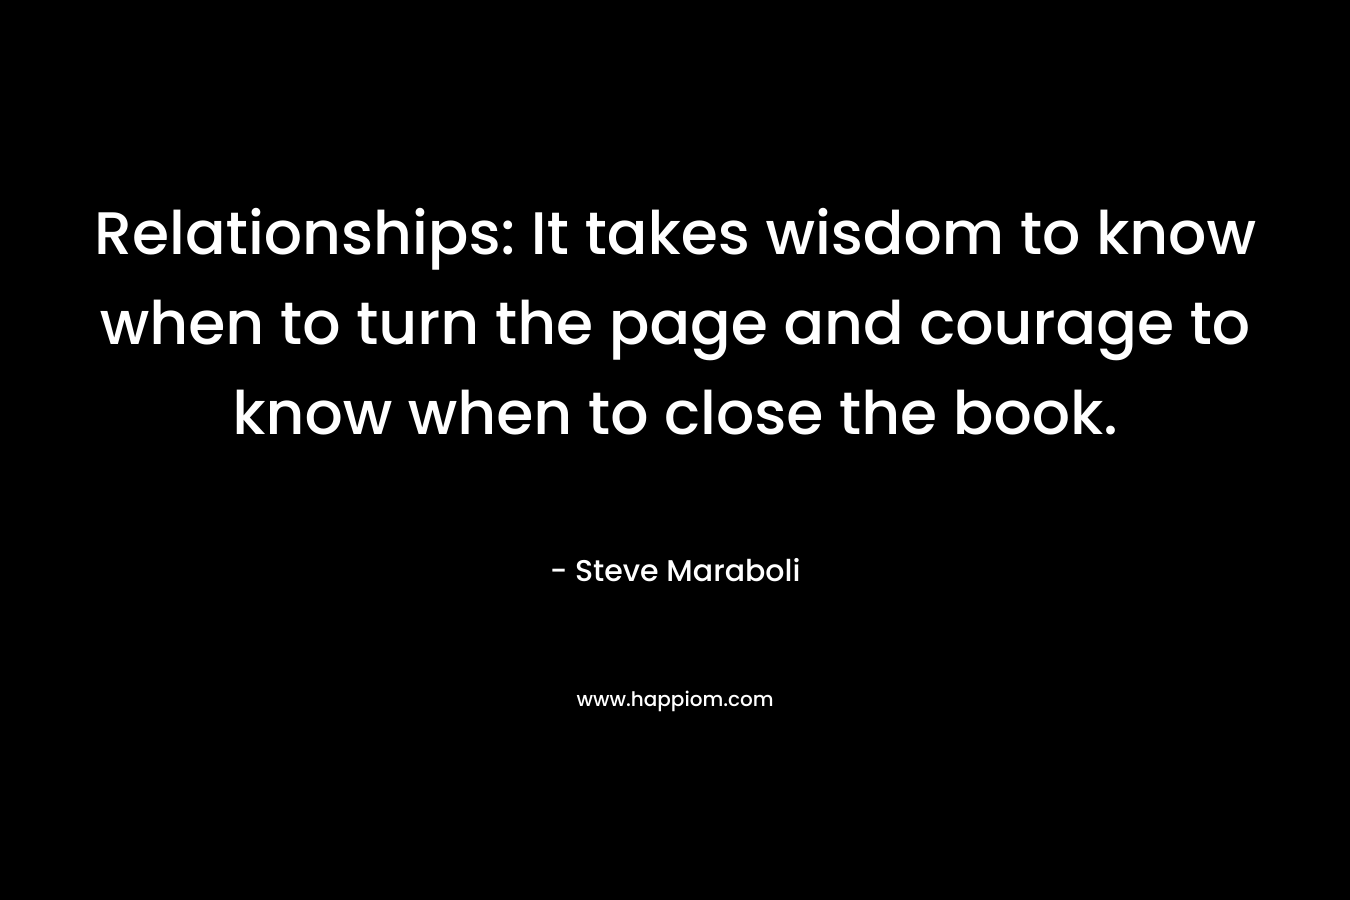 Relationships: It takes wisdom to know when to turn the page and courage to know when to close the book.